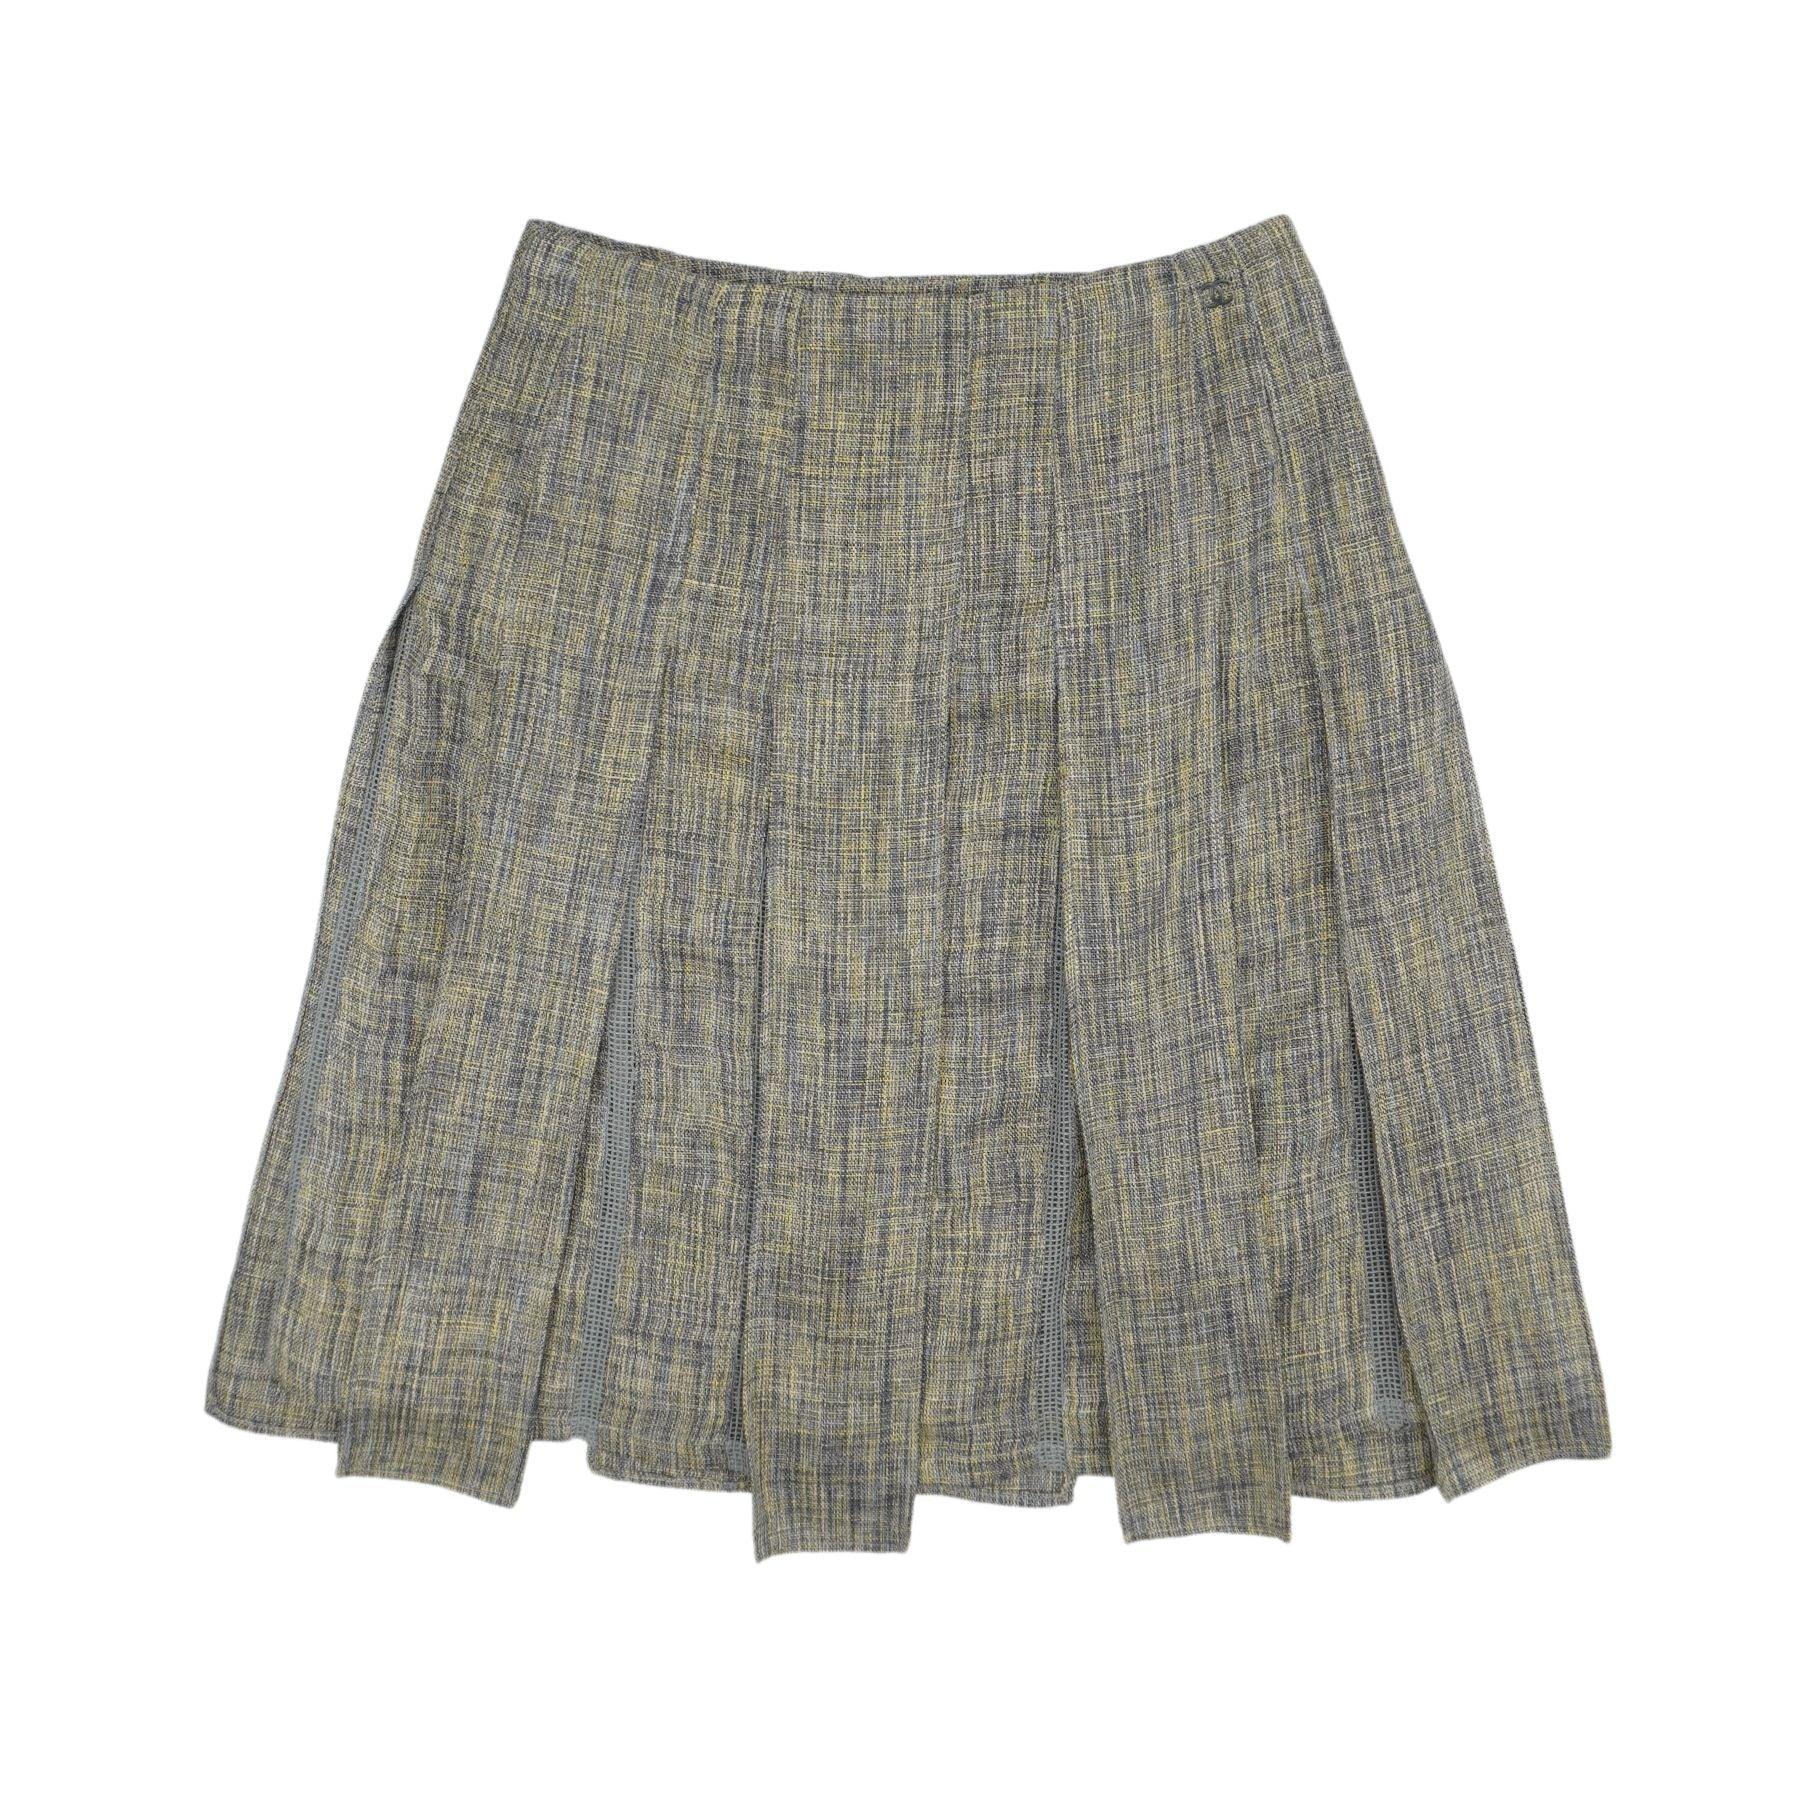 Chanel '99P' Skirt - Women's 38 - Fashionably Yours